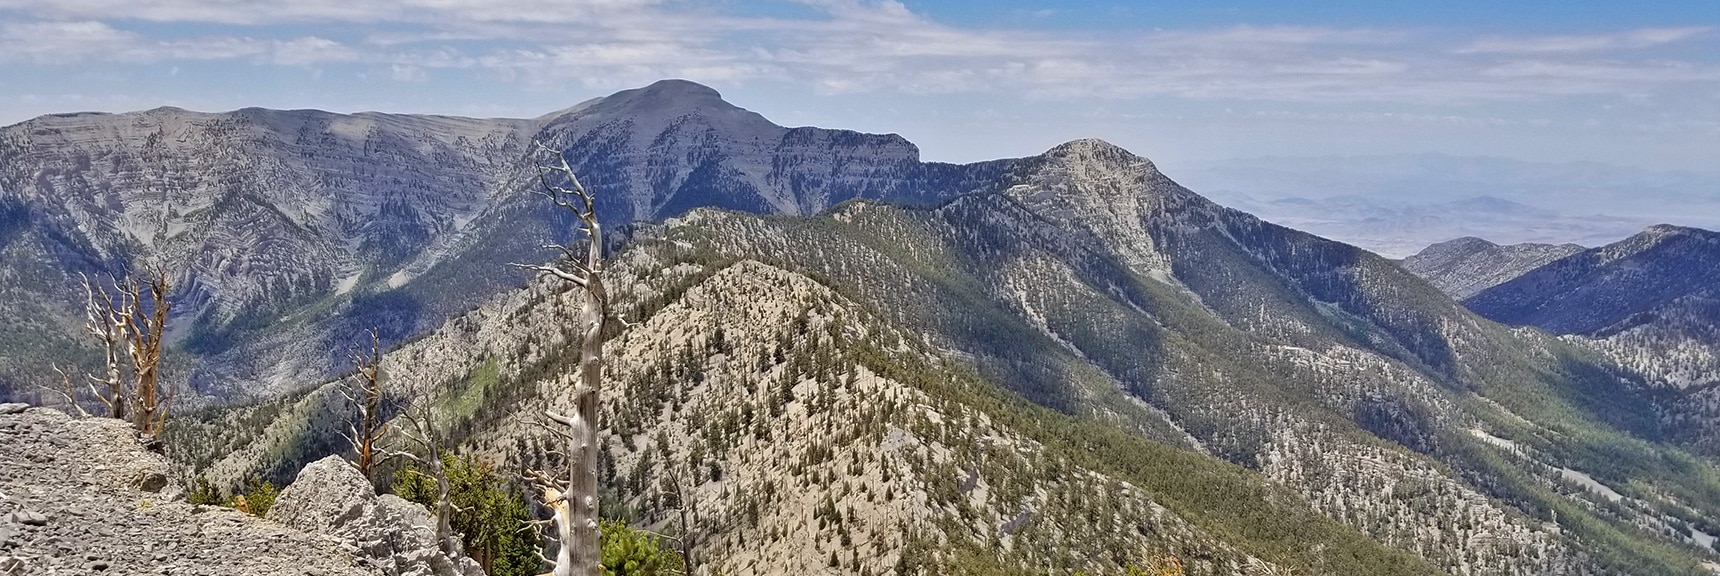 The North Ridge of Kyle Canyon is an Upper Approach to Lee Peak and Charleston Peak | Mummy Mountain NW Cliffs | Mt Charleston Wilderness | Spring Mountains, Nevada